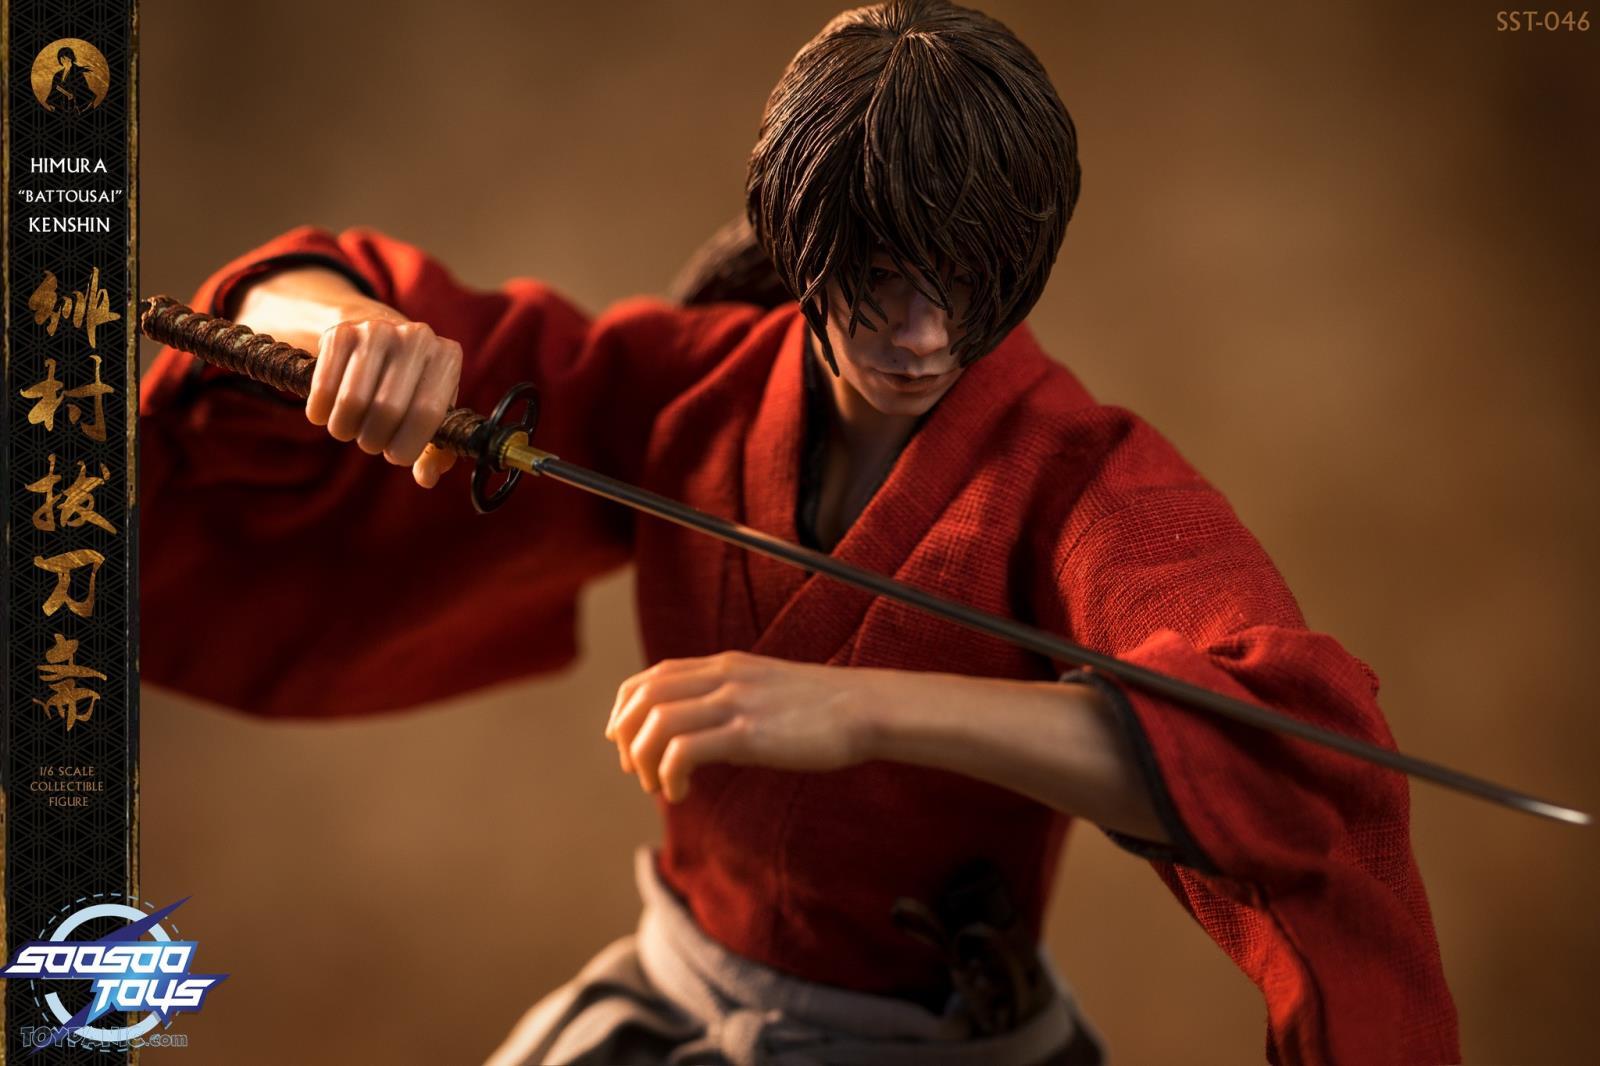 kenshin - NEW PRODUCT: 1/6 scale Rurouni Kenshin Collectible Figure from SooSooToys 712202251230PM_8303448